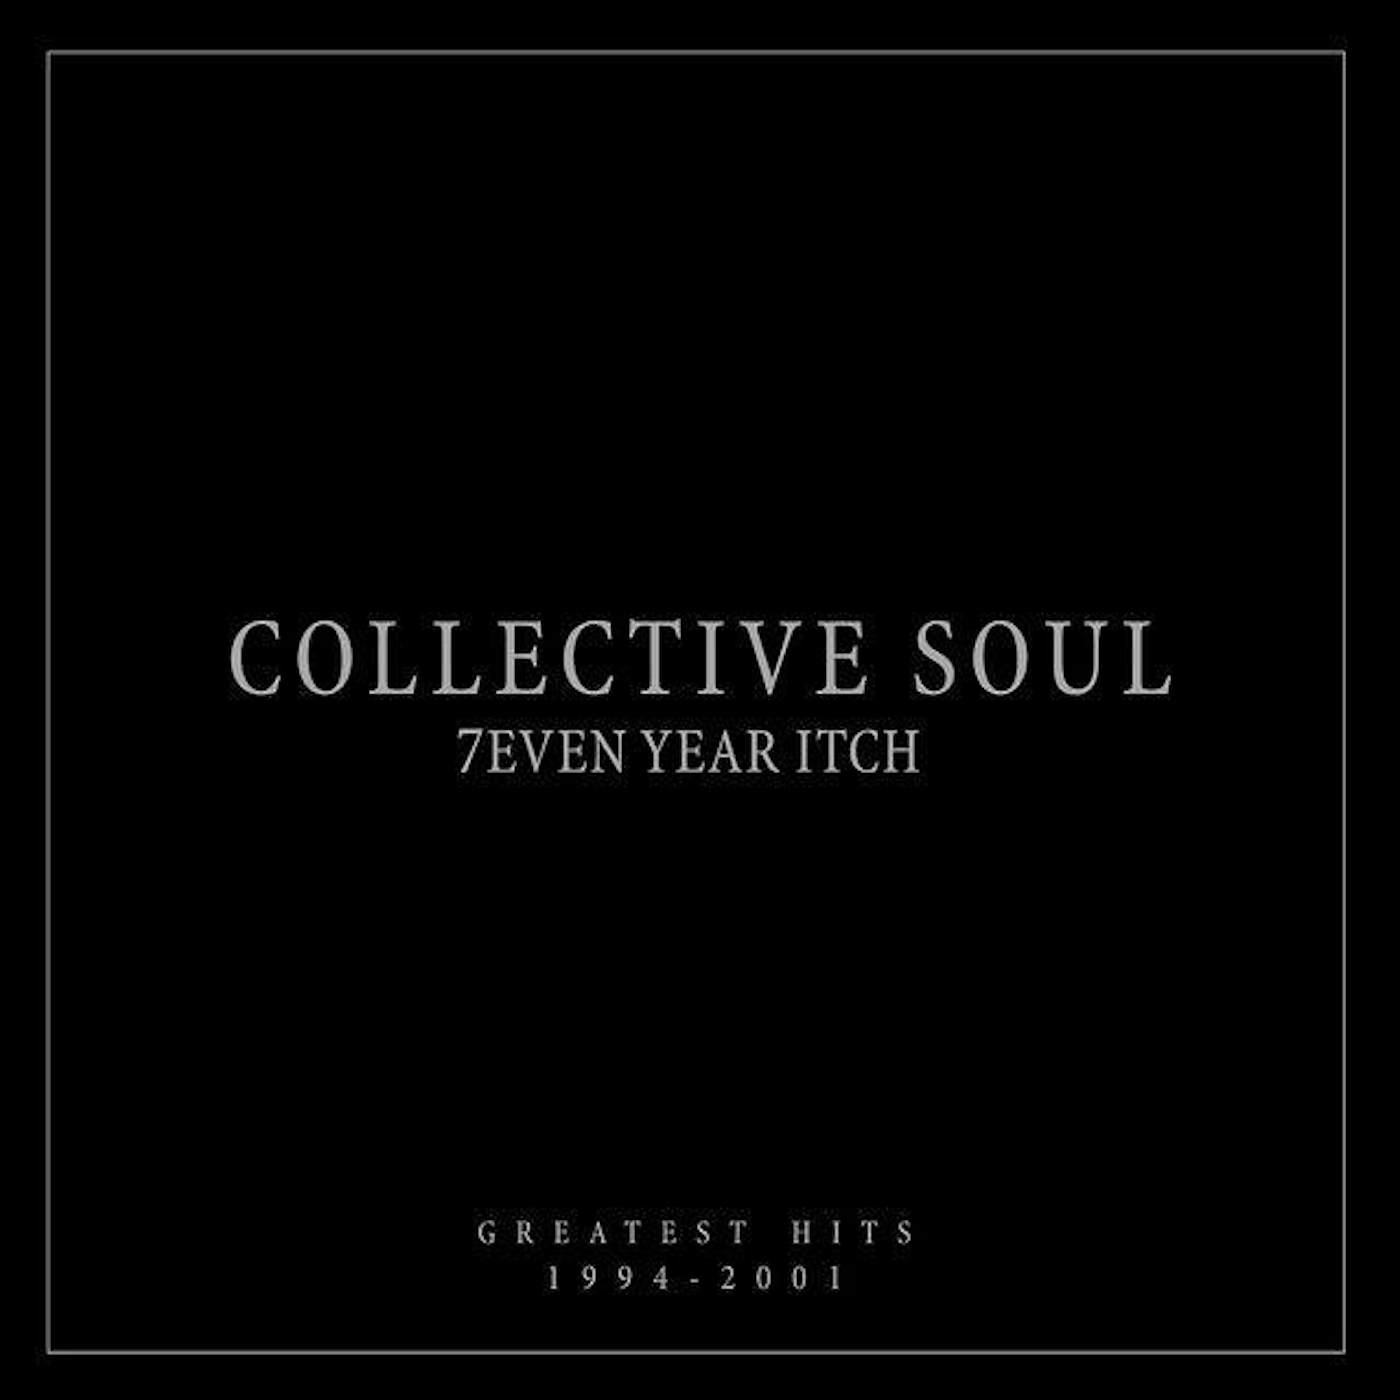 Collective Soul 7even Year Itch: Greatest Hits, 1994-2001 Vinyl Record